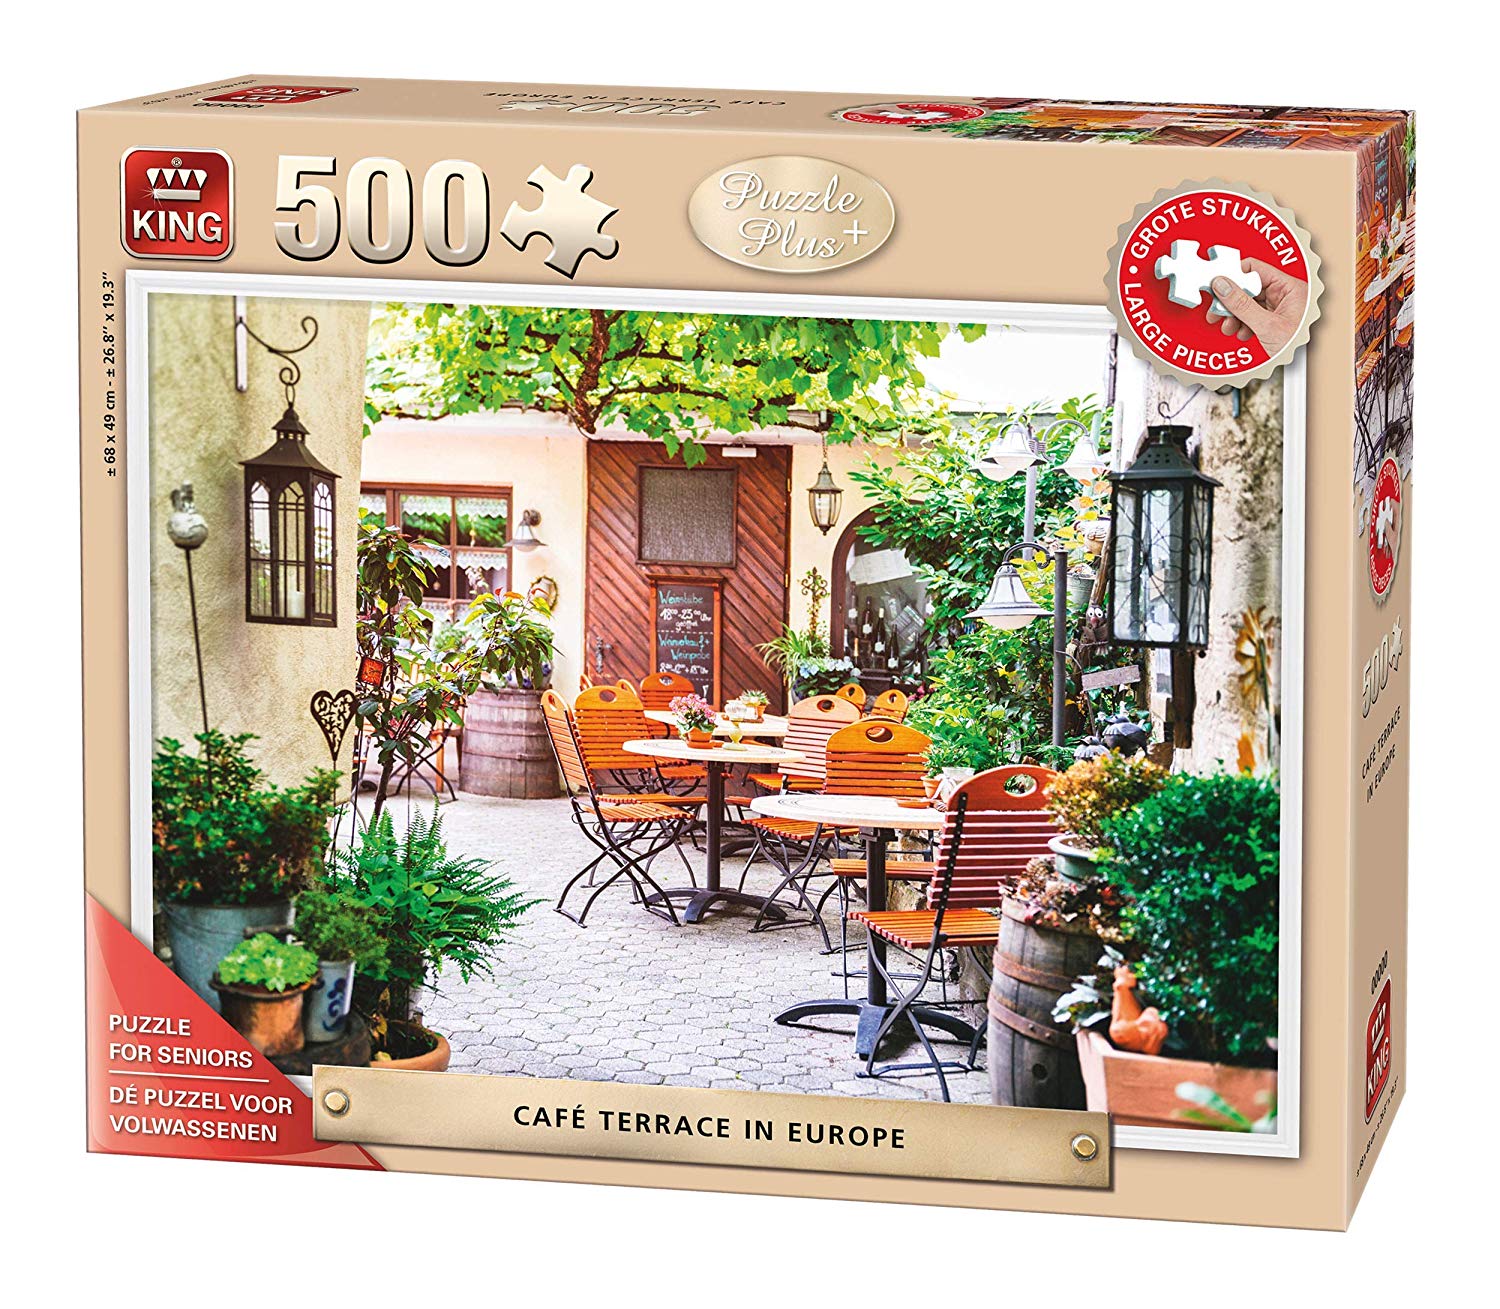 'King 14.051,3) Cafe Terrace in Europe Senior Adult Jigsaw Puzzle (500 Piec